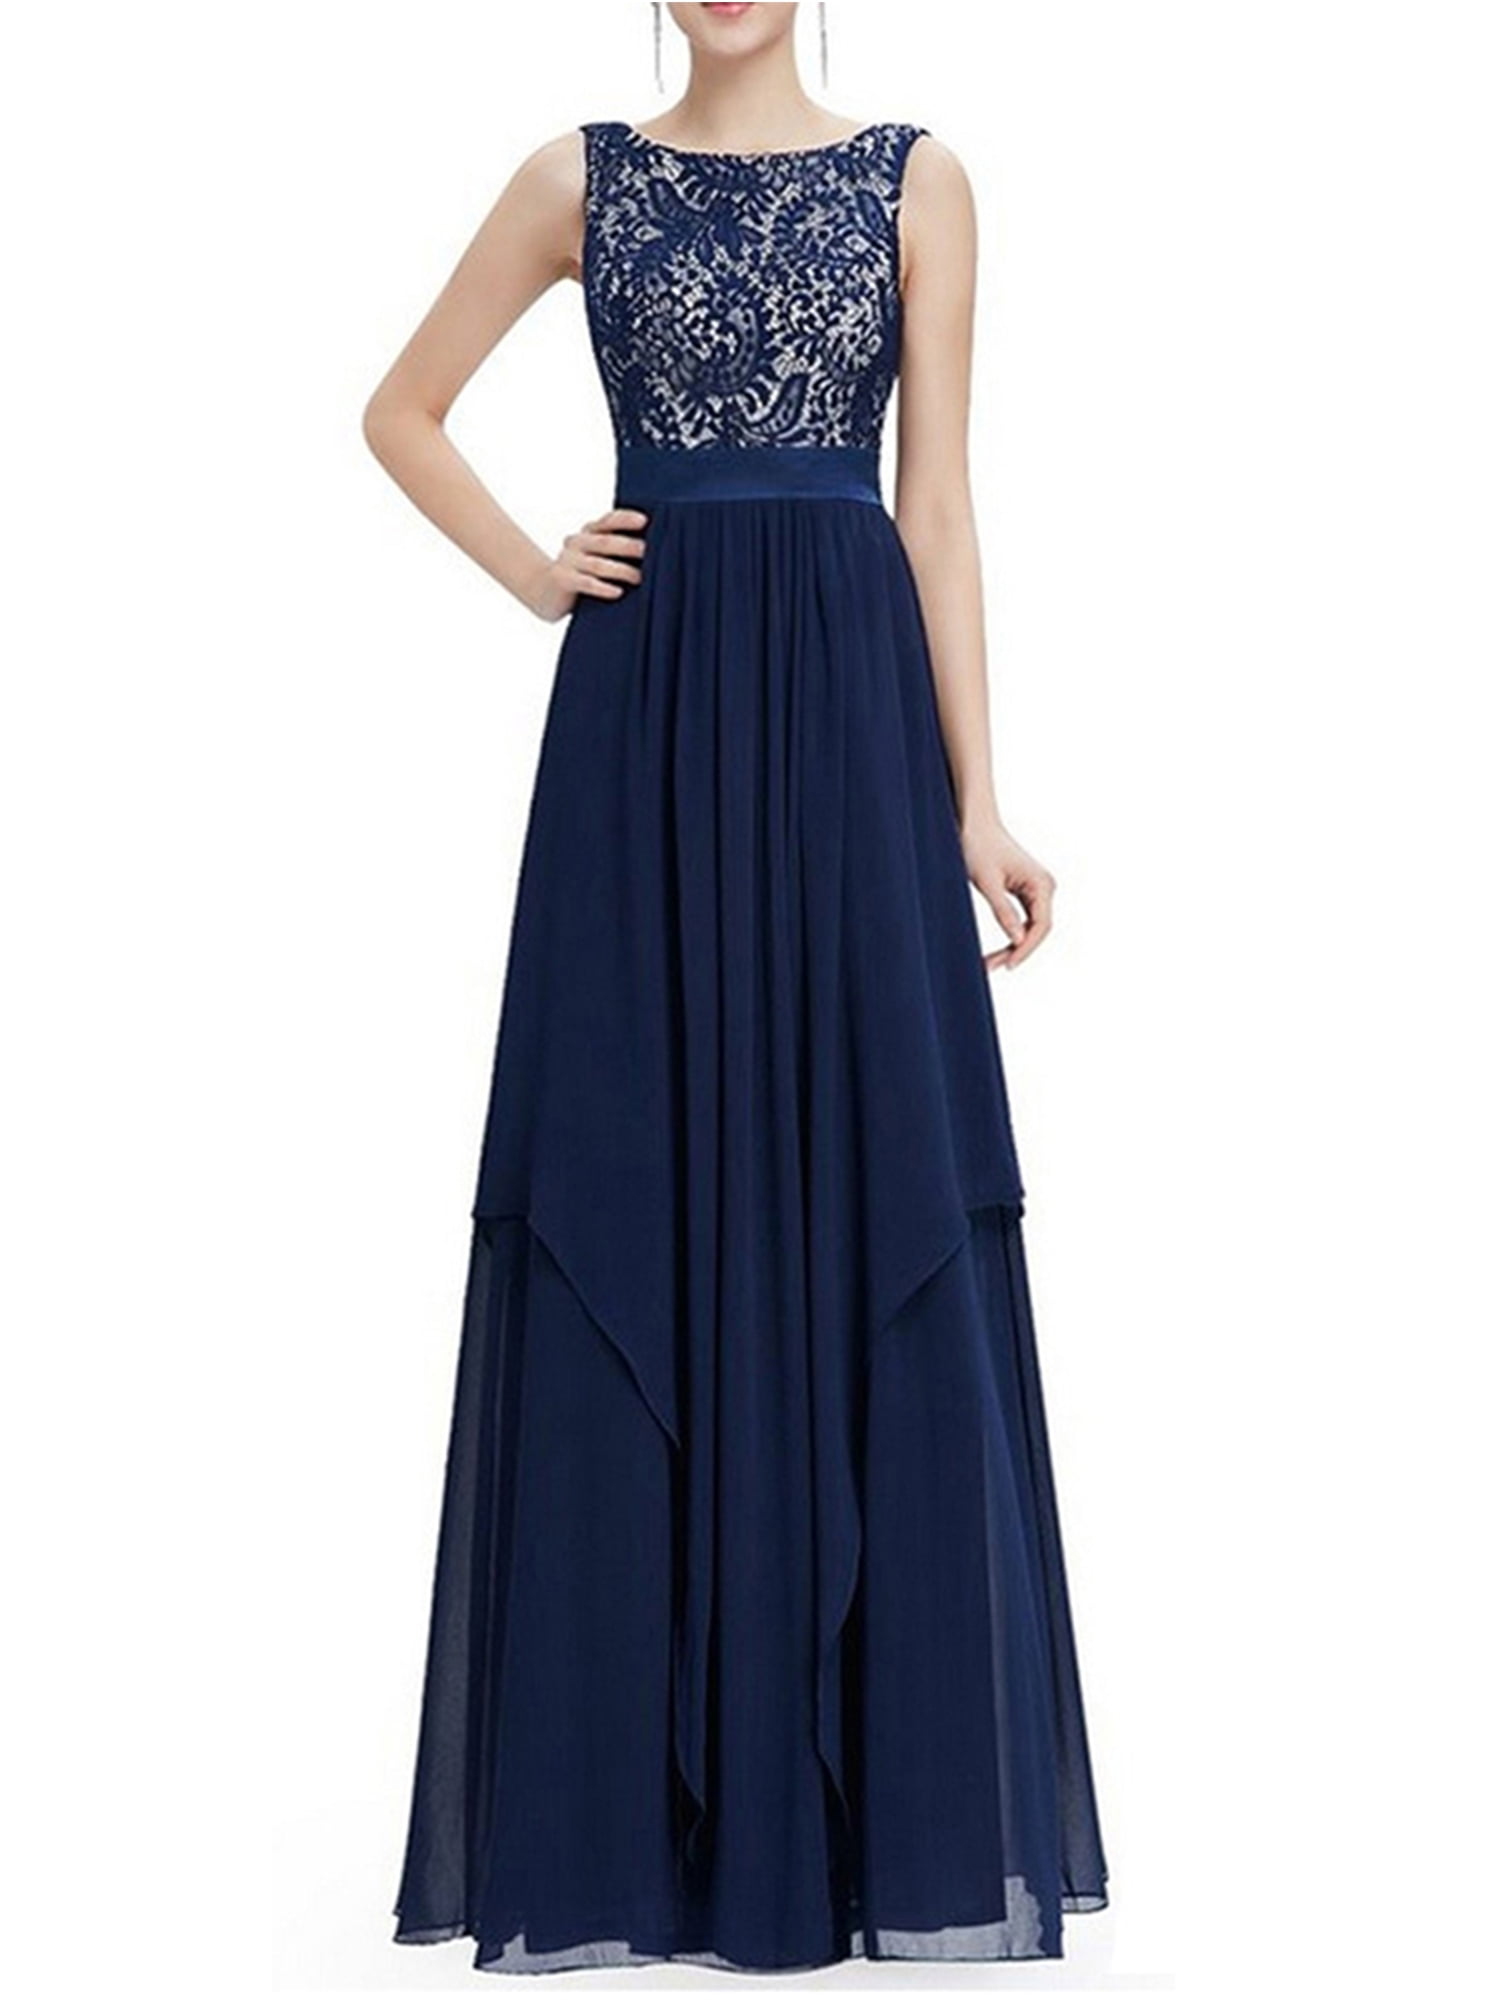 Women Long Formal Evening Prom Party Bridesmaid Chiffon Ball Gown Cocktail Dress